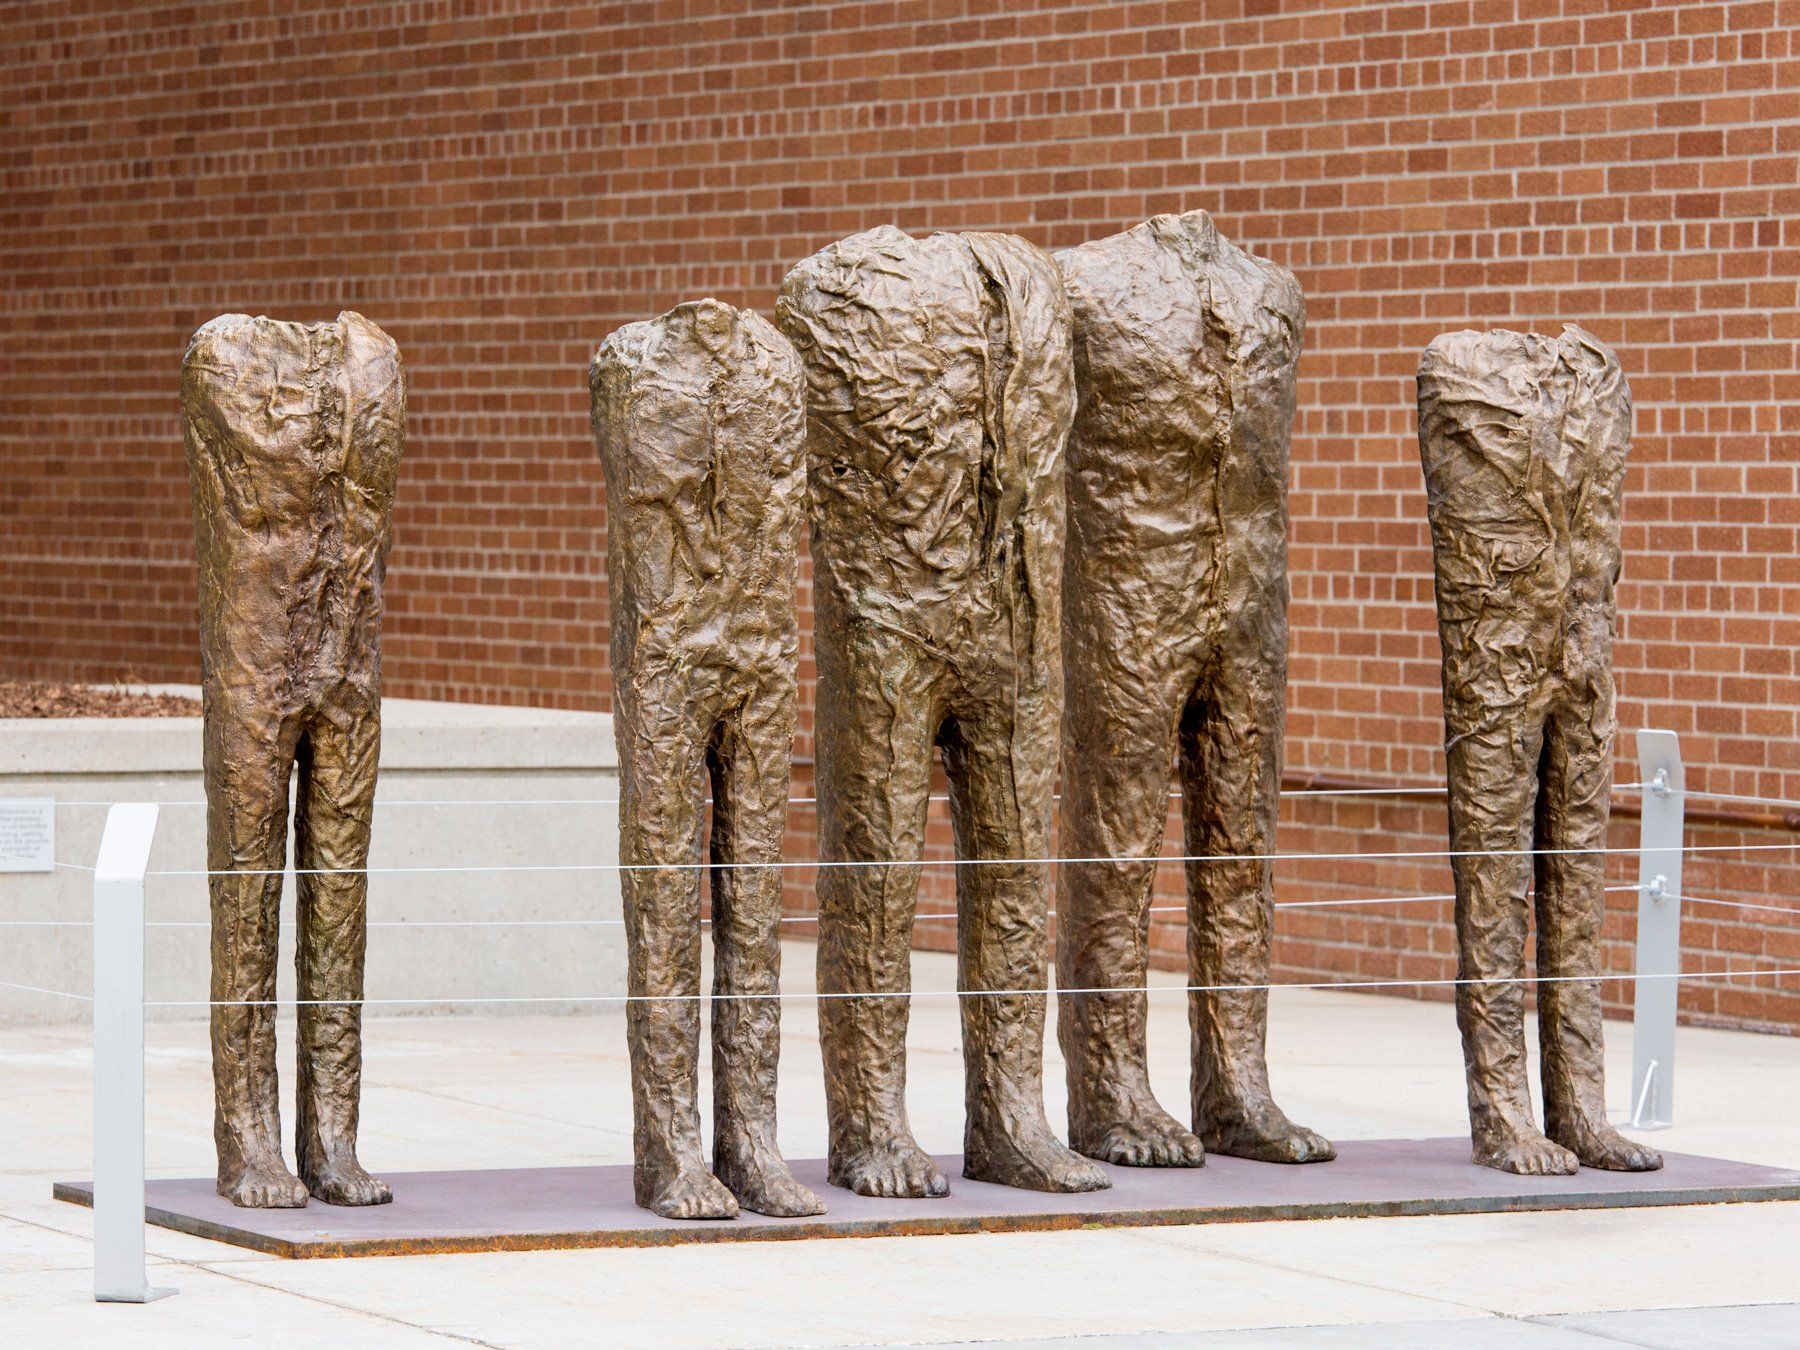 Magdalena Abakanowicz | The Group of Five |  Sculpture Milwaukee 2018